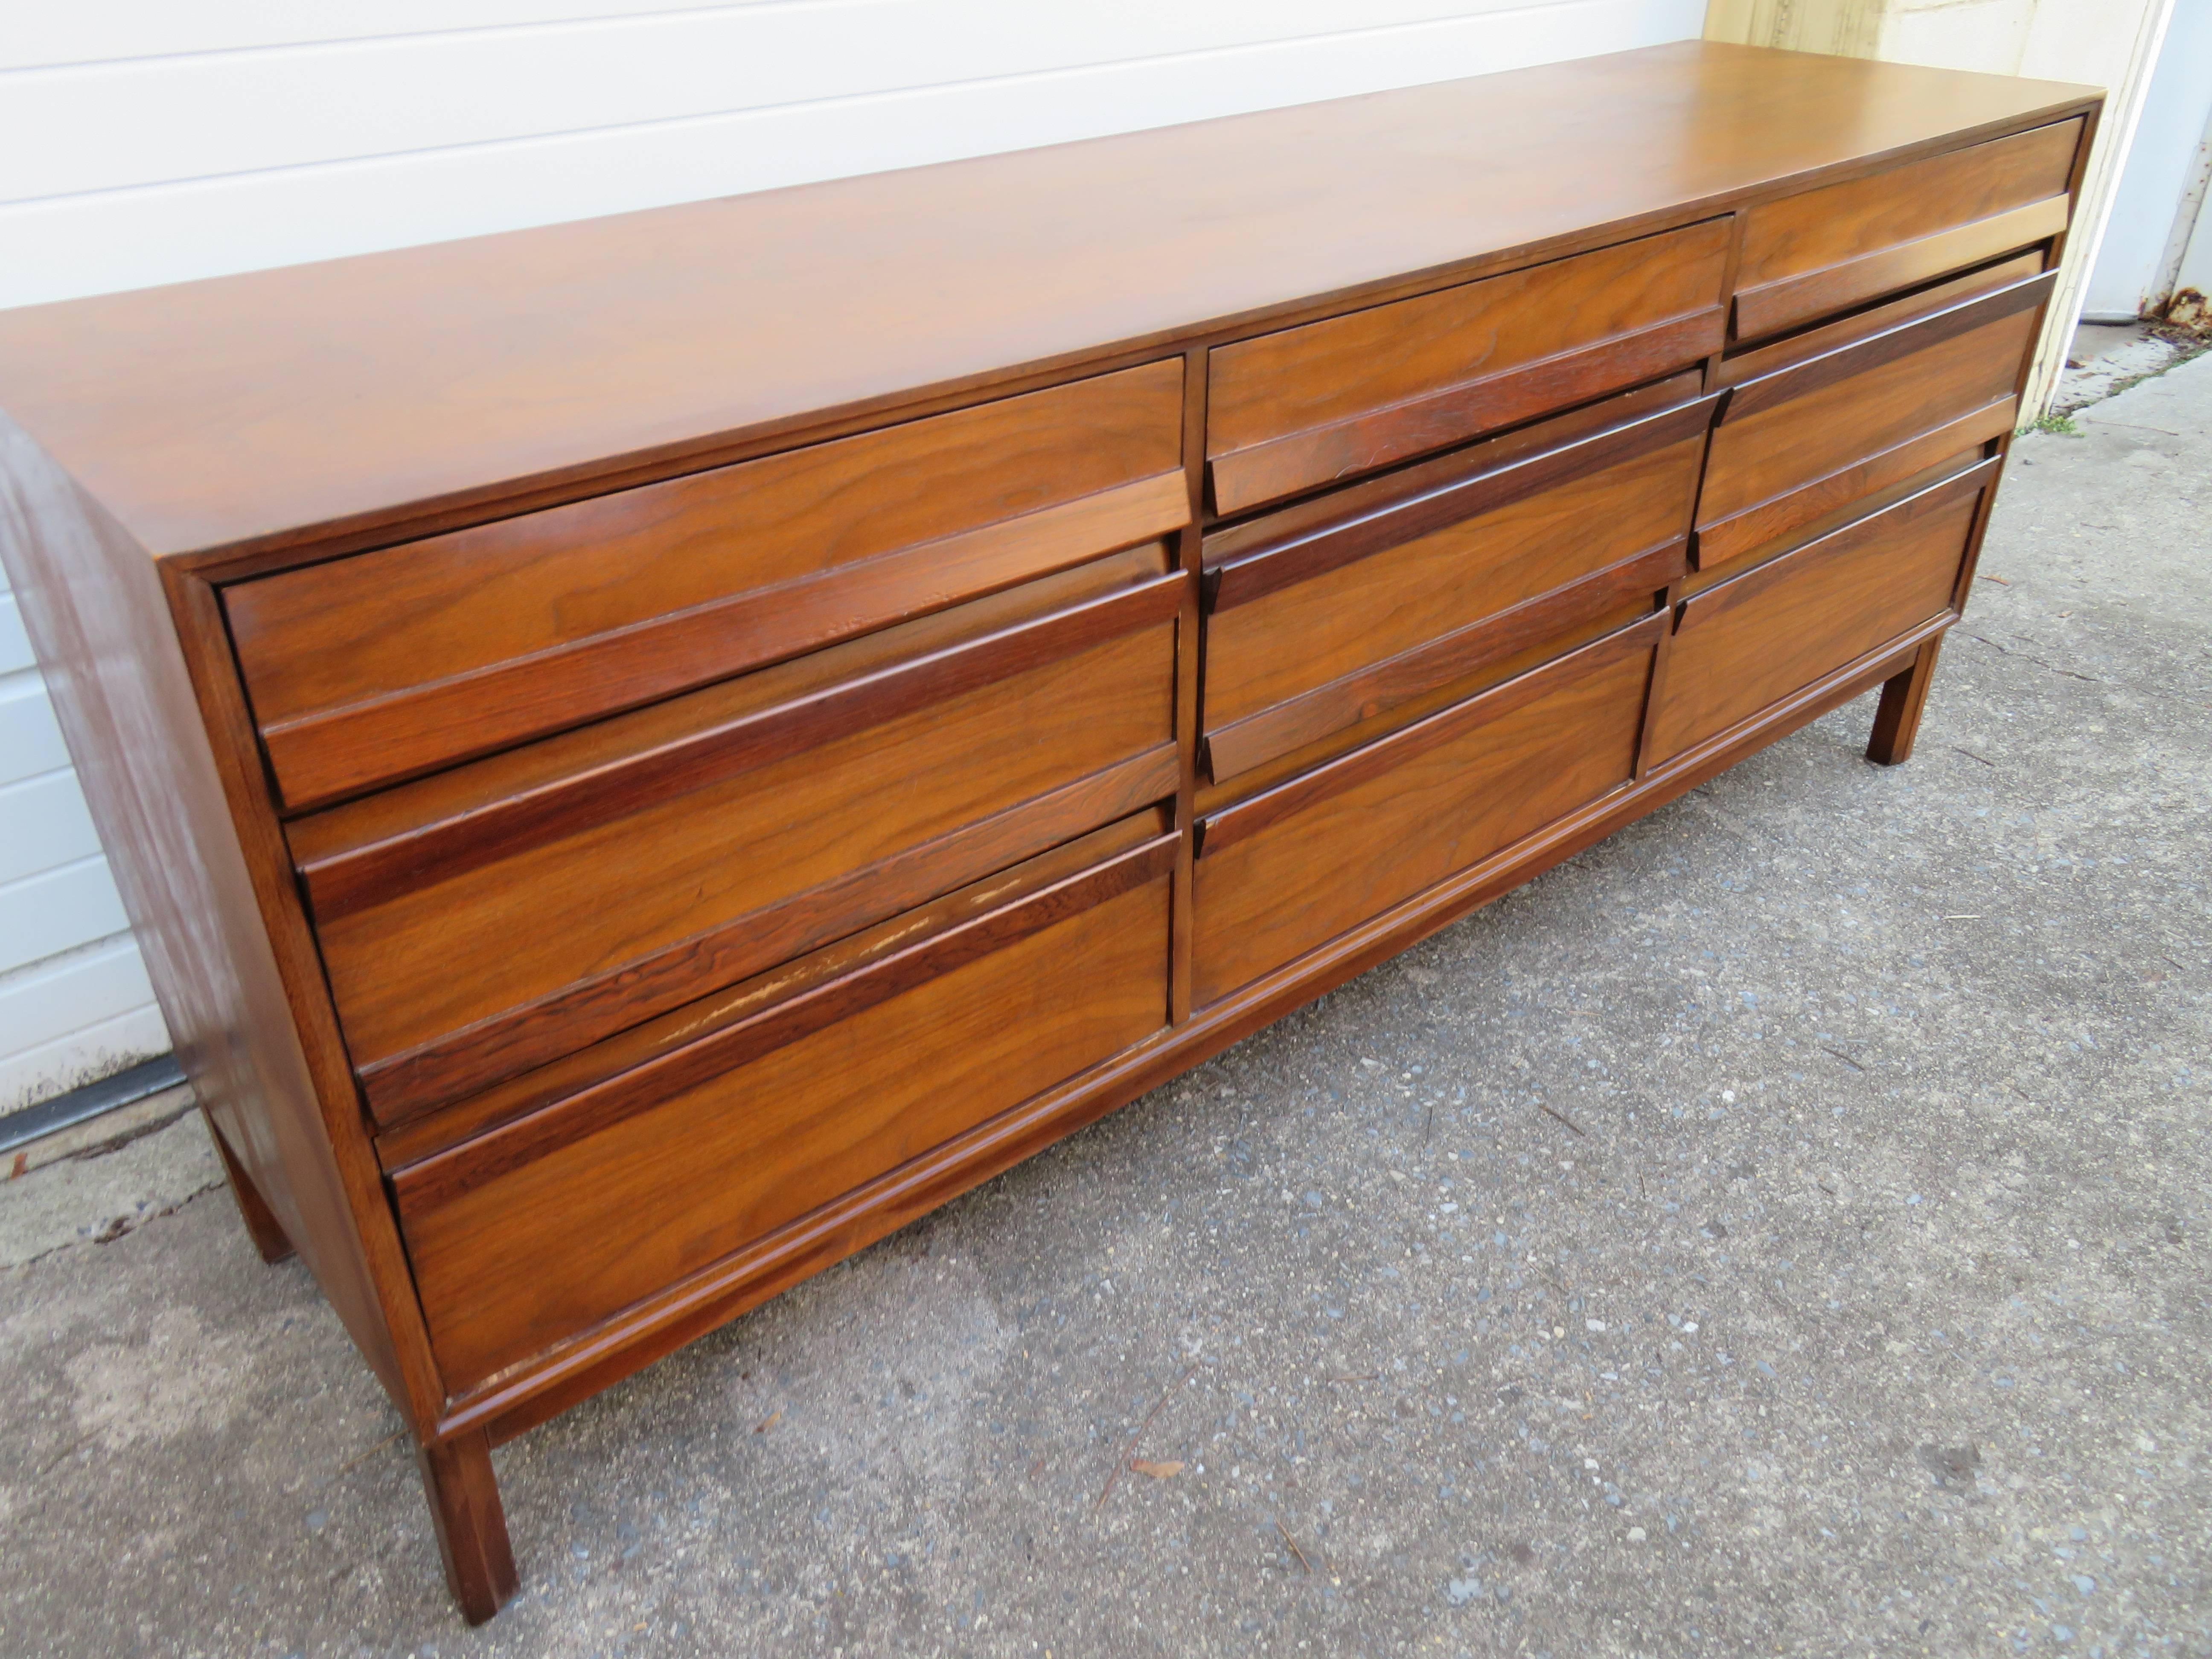 Handsome American of Martinsville walnut and rosewood credenza. With simple clean lines this piece has rosewood pulls and a walnut case. Please check out the other matching pieces to this collection in our other 1stdibs offerings including headboard